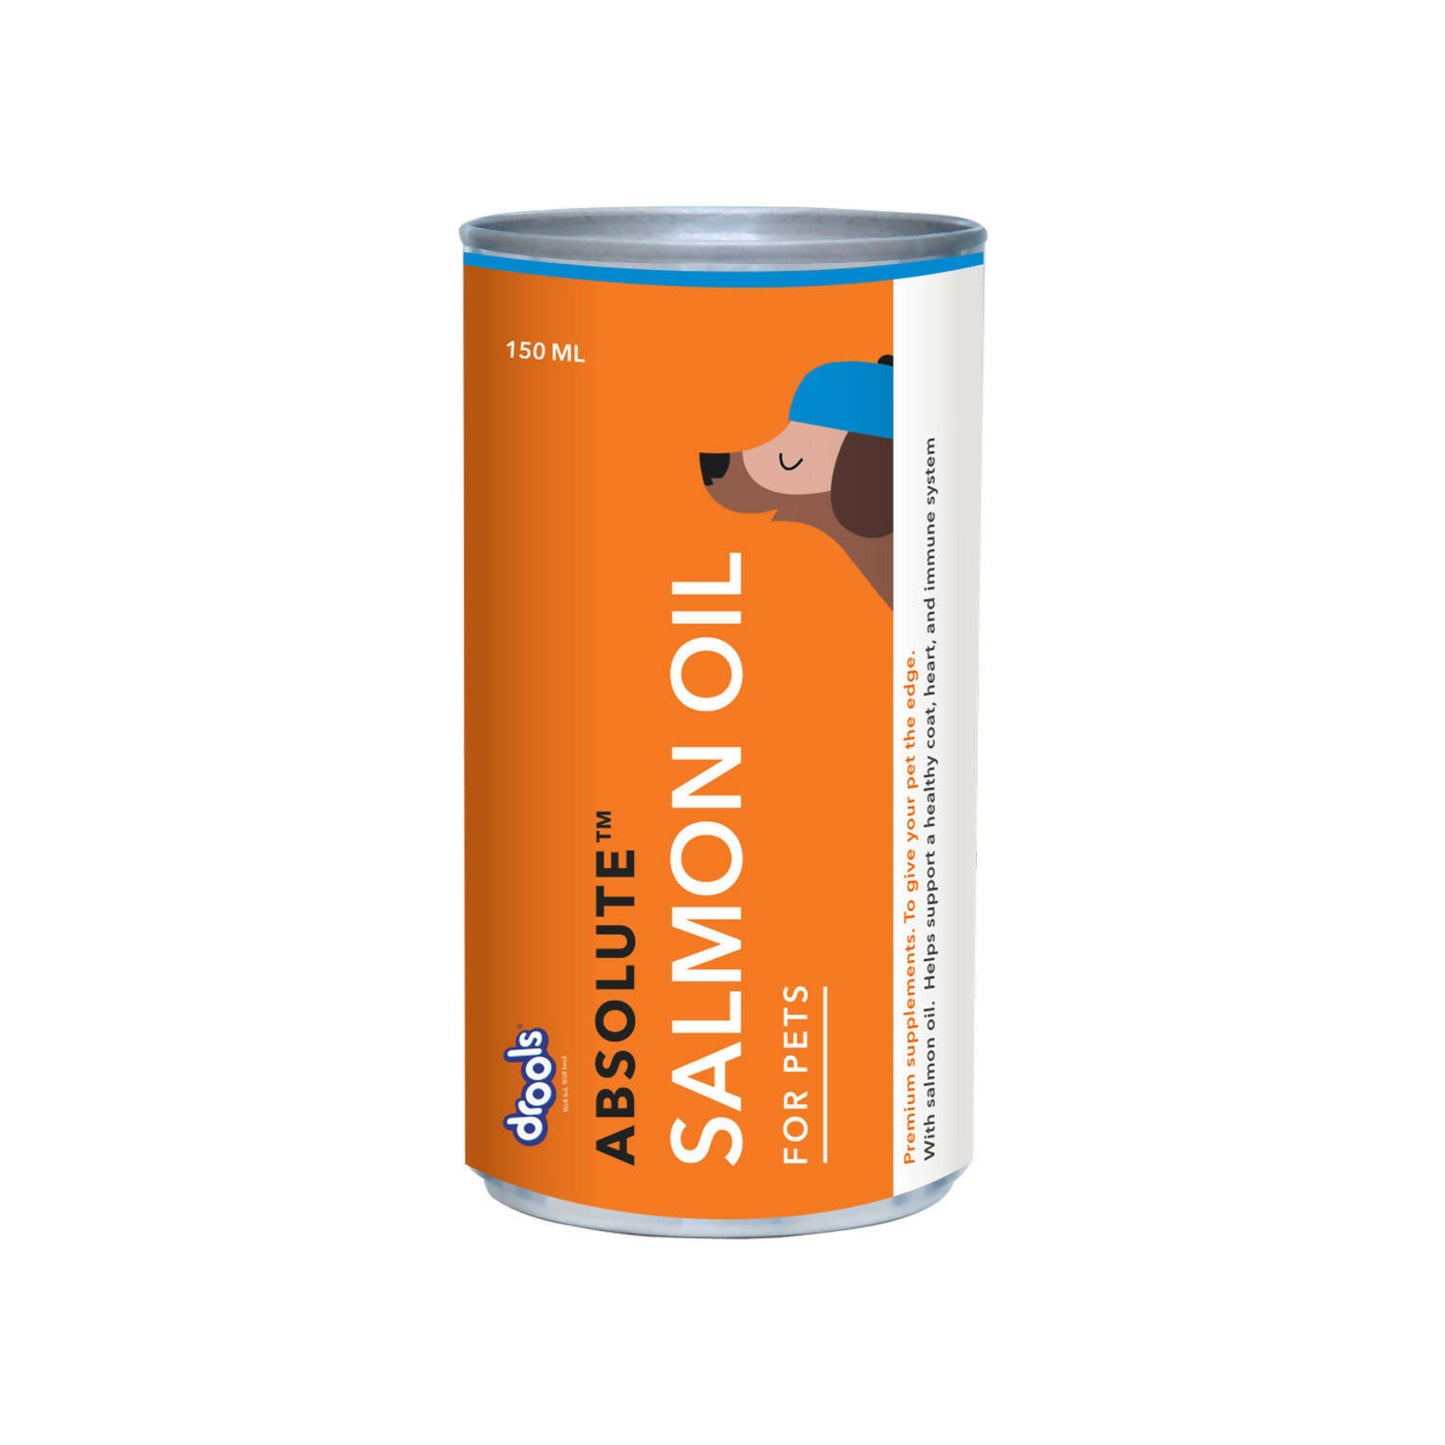 Drools - Absolute Salmon Oil Syrup Dog Supplement